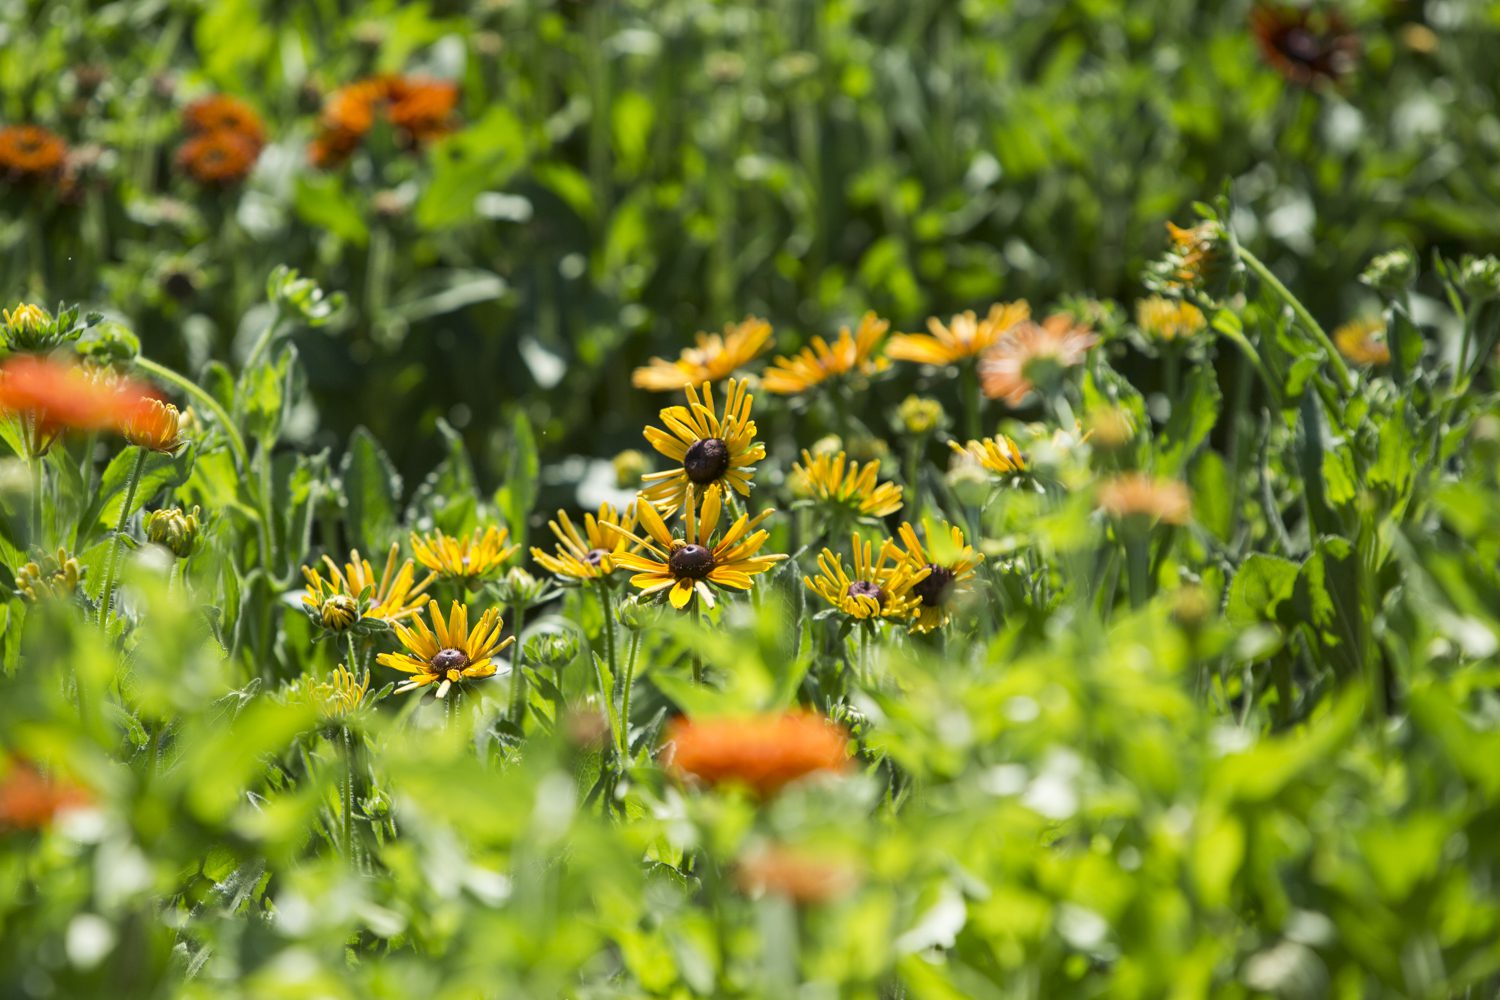 A field of flowers with orange and yellow flowers.